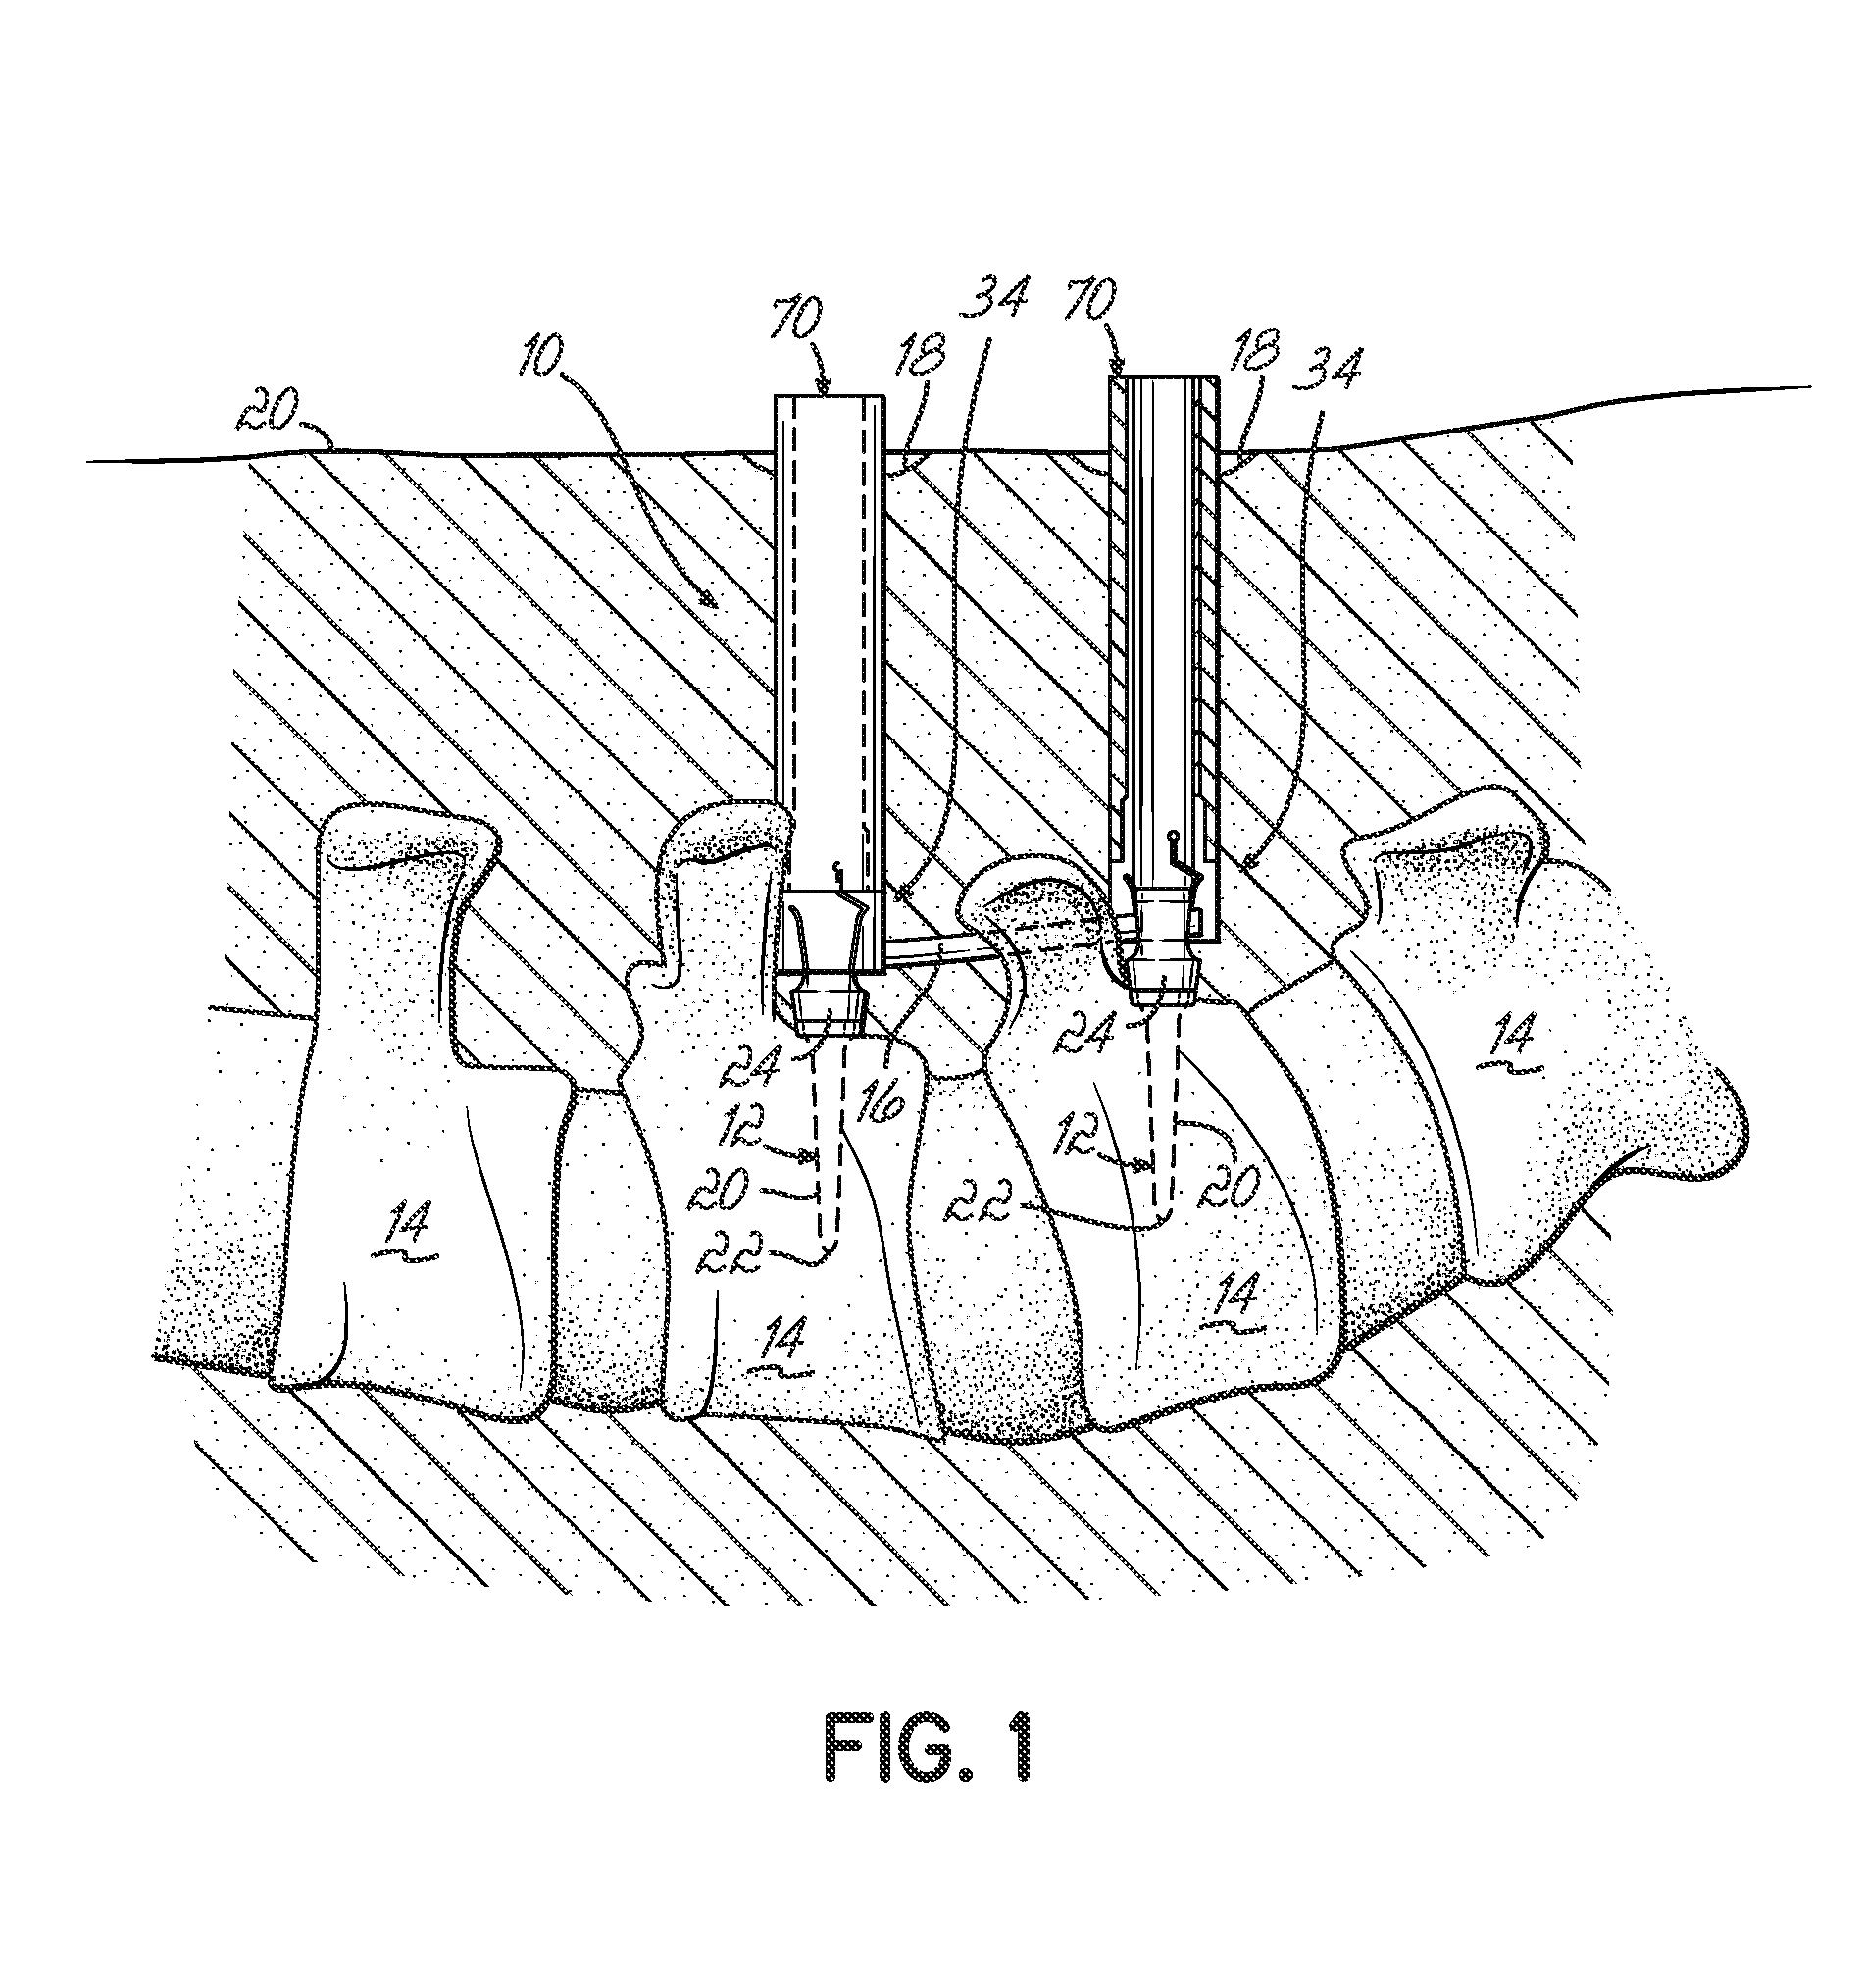 Minimally invasive vertebral anchor access system and associated method